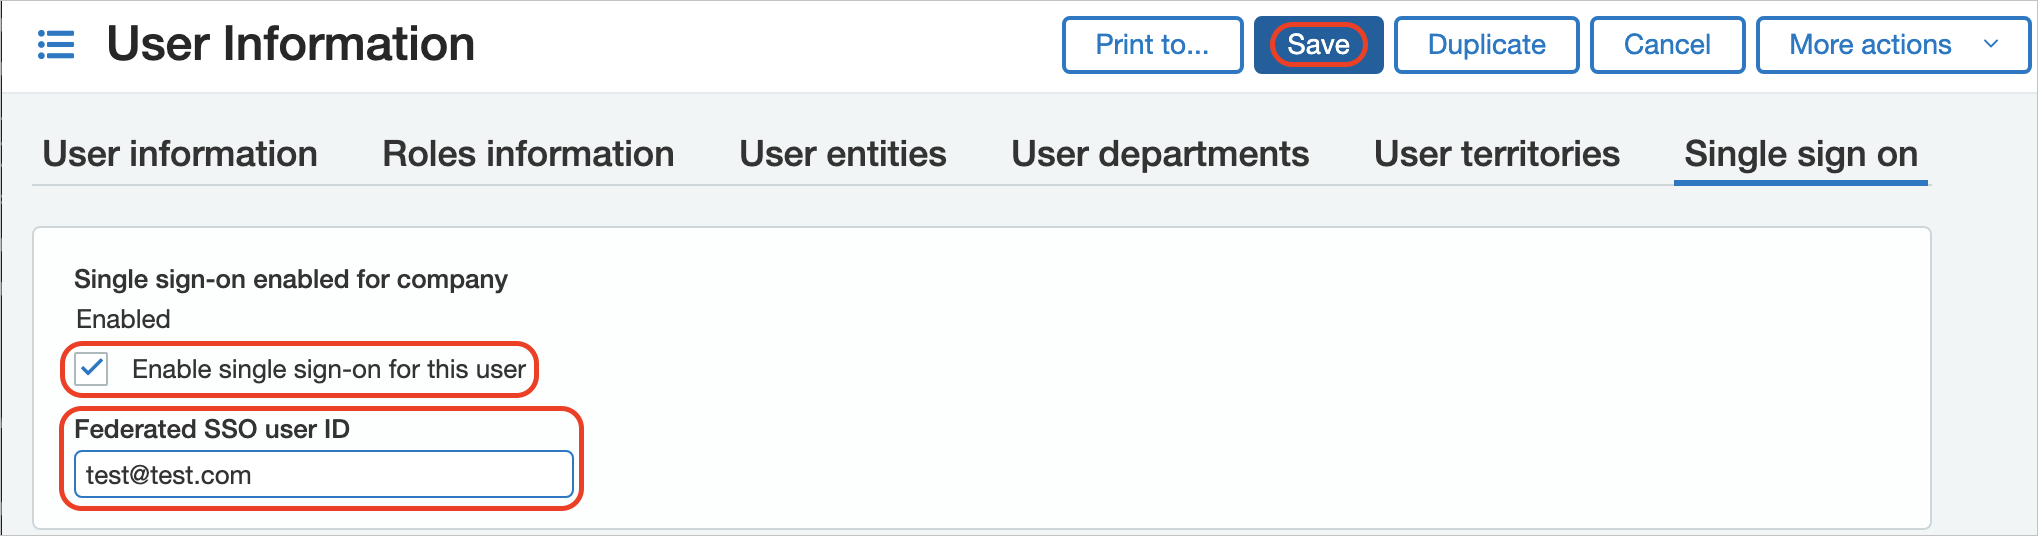 Screenshot shows the User Information section where you can enter the Federated S S O user i d.